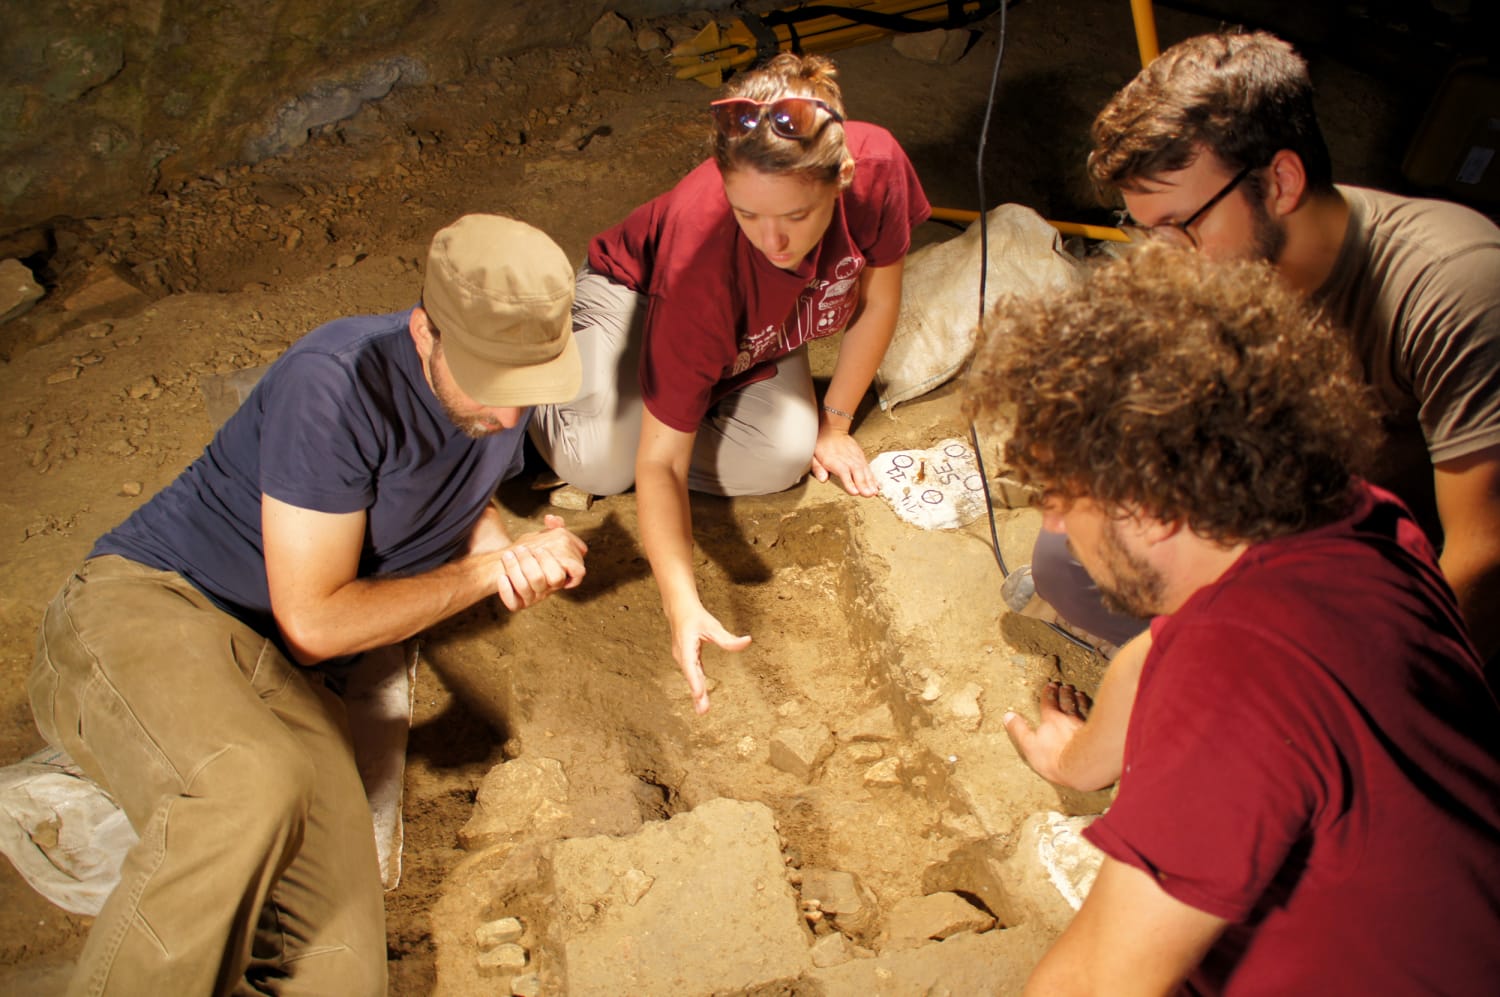 10,000-year-old female infant remains found in Italy shed new light on early human society